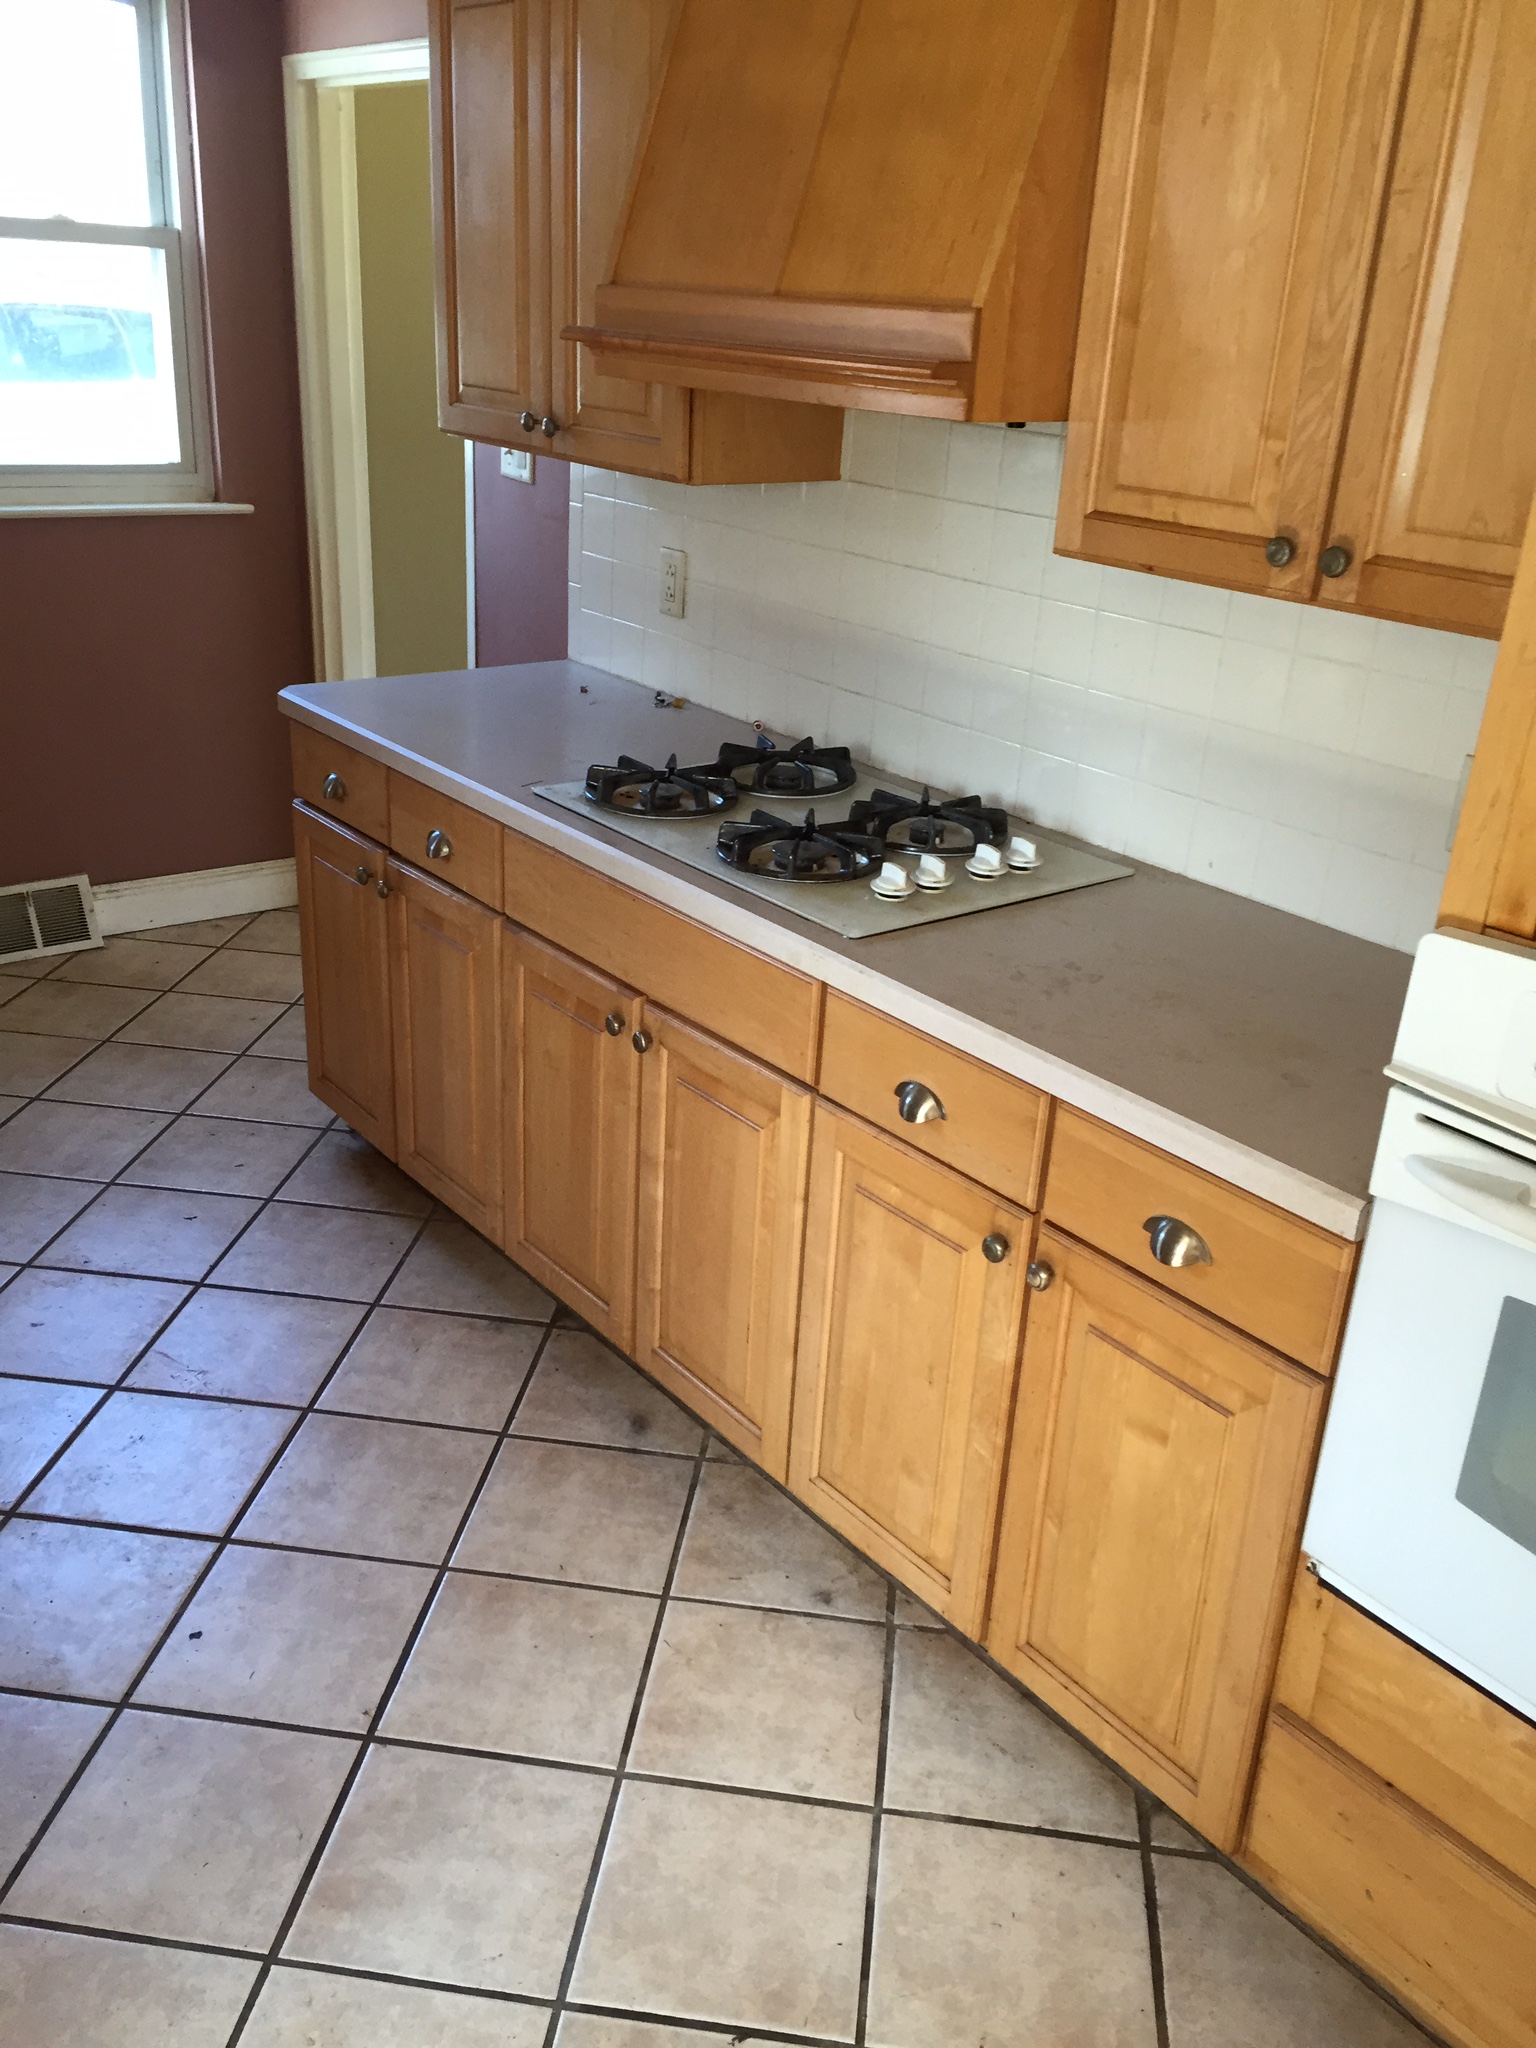 Kitchen Tile Cleaning on the mainline